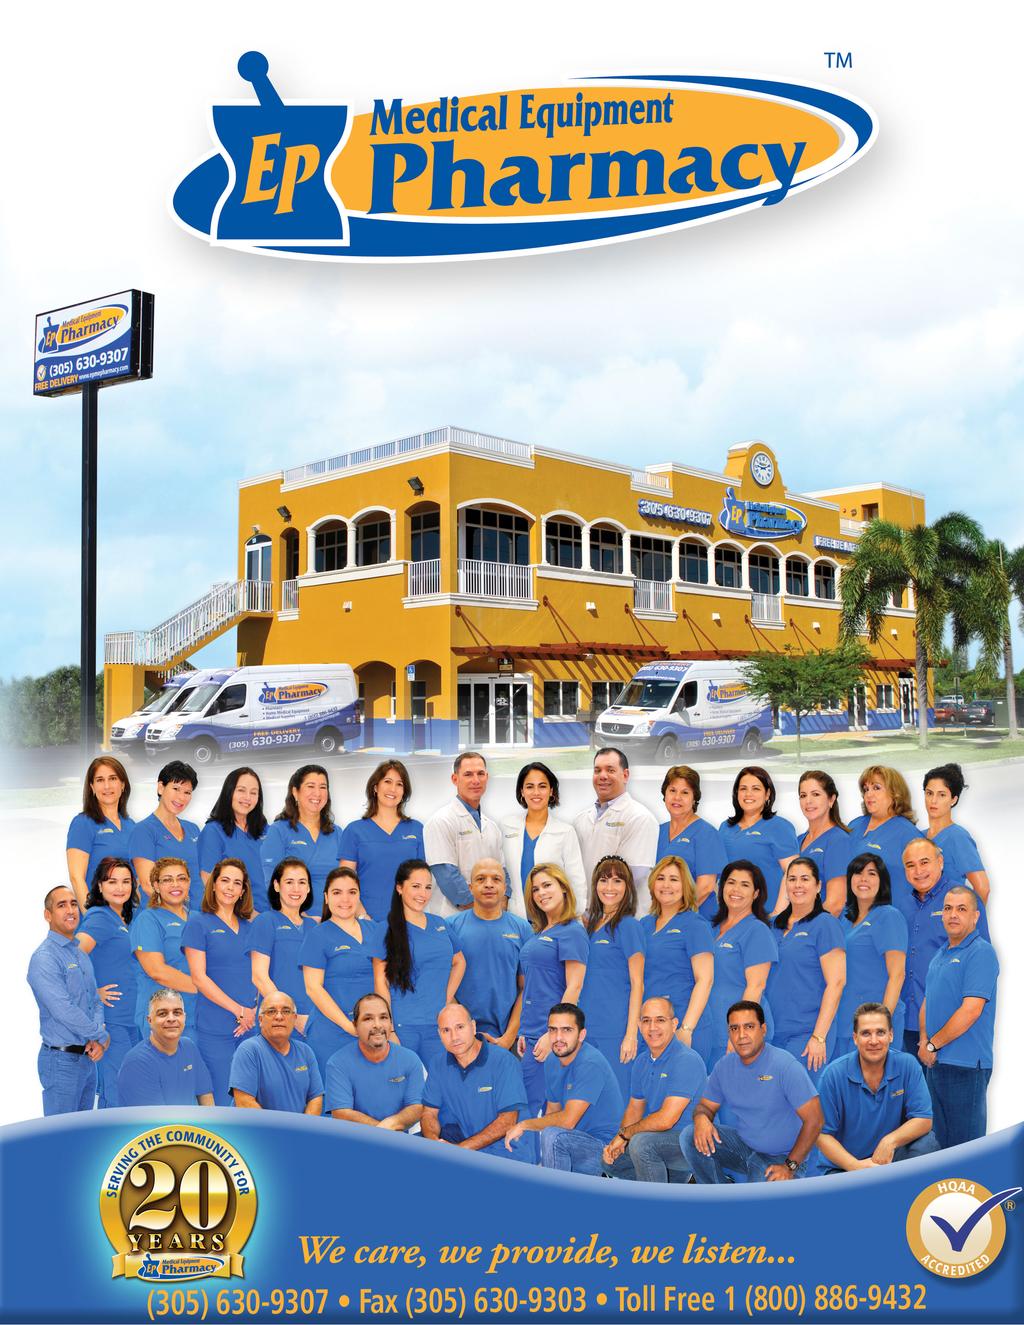 For 20 years, EP edical Equipment Pharmacy has been committed to offering quality products for all of your home healthcare needs.